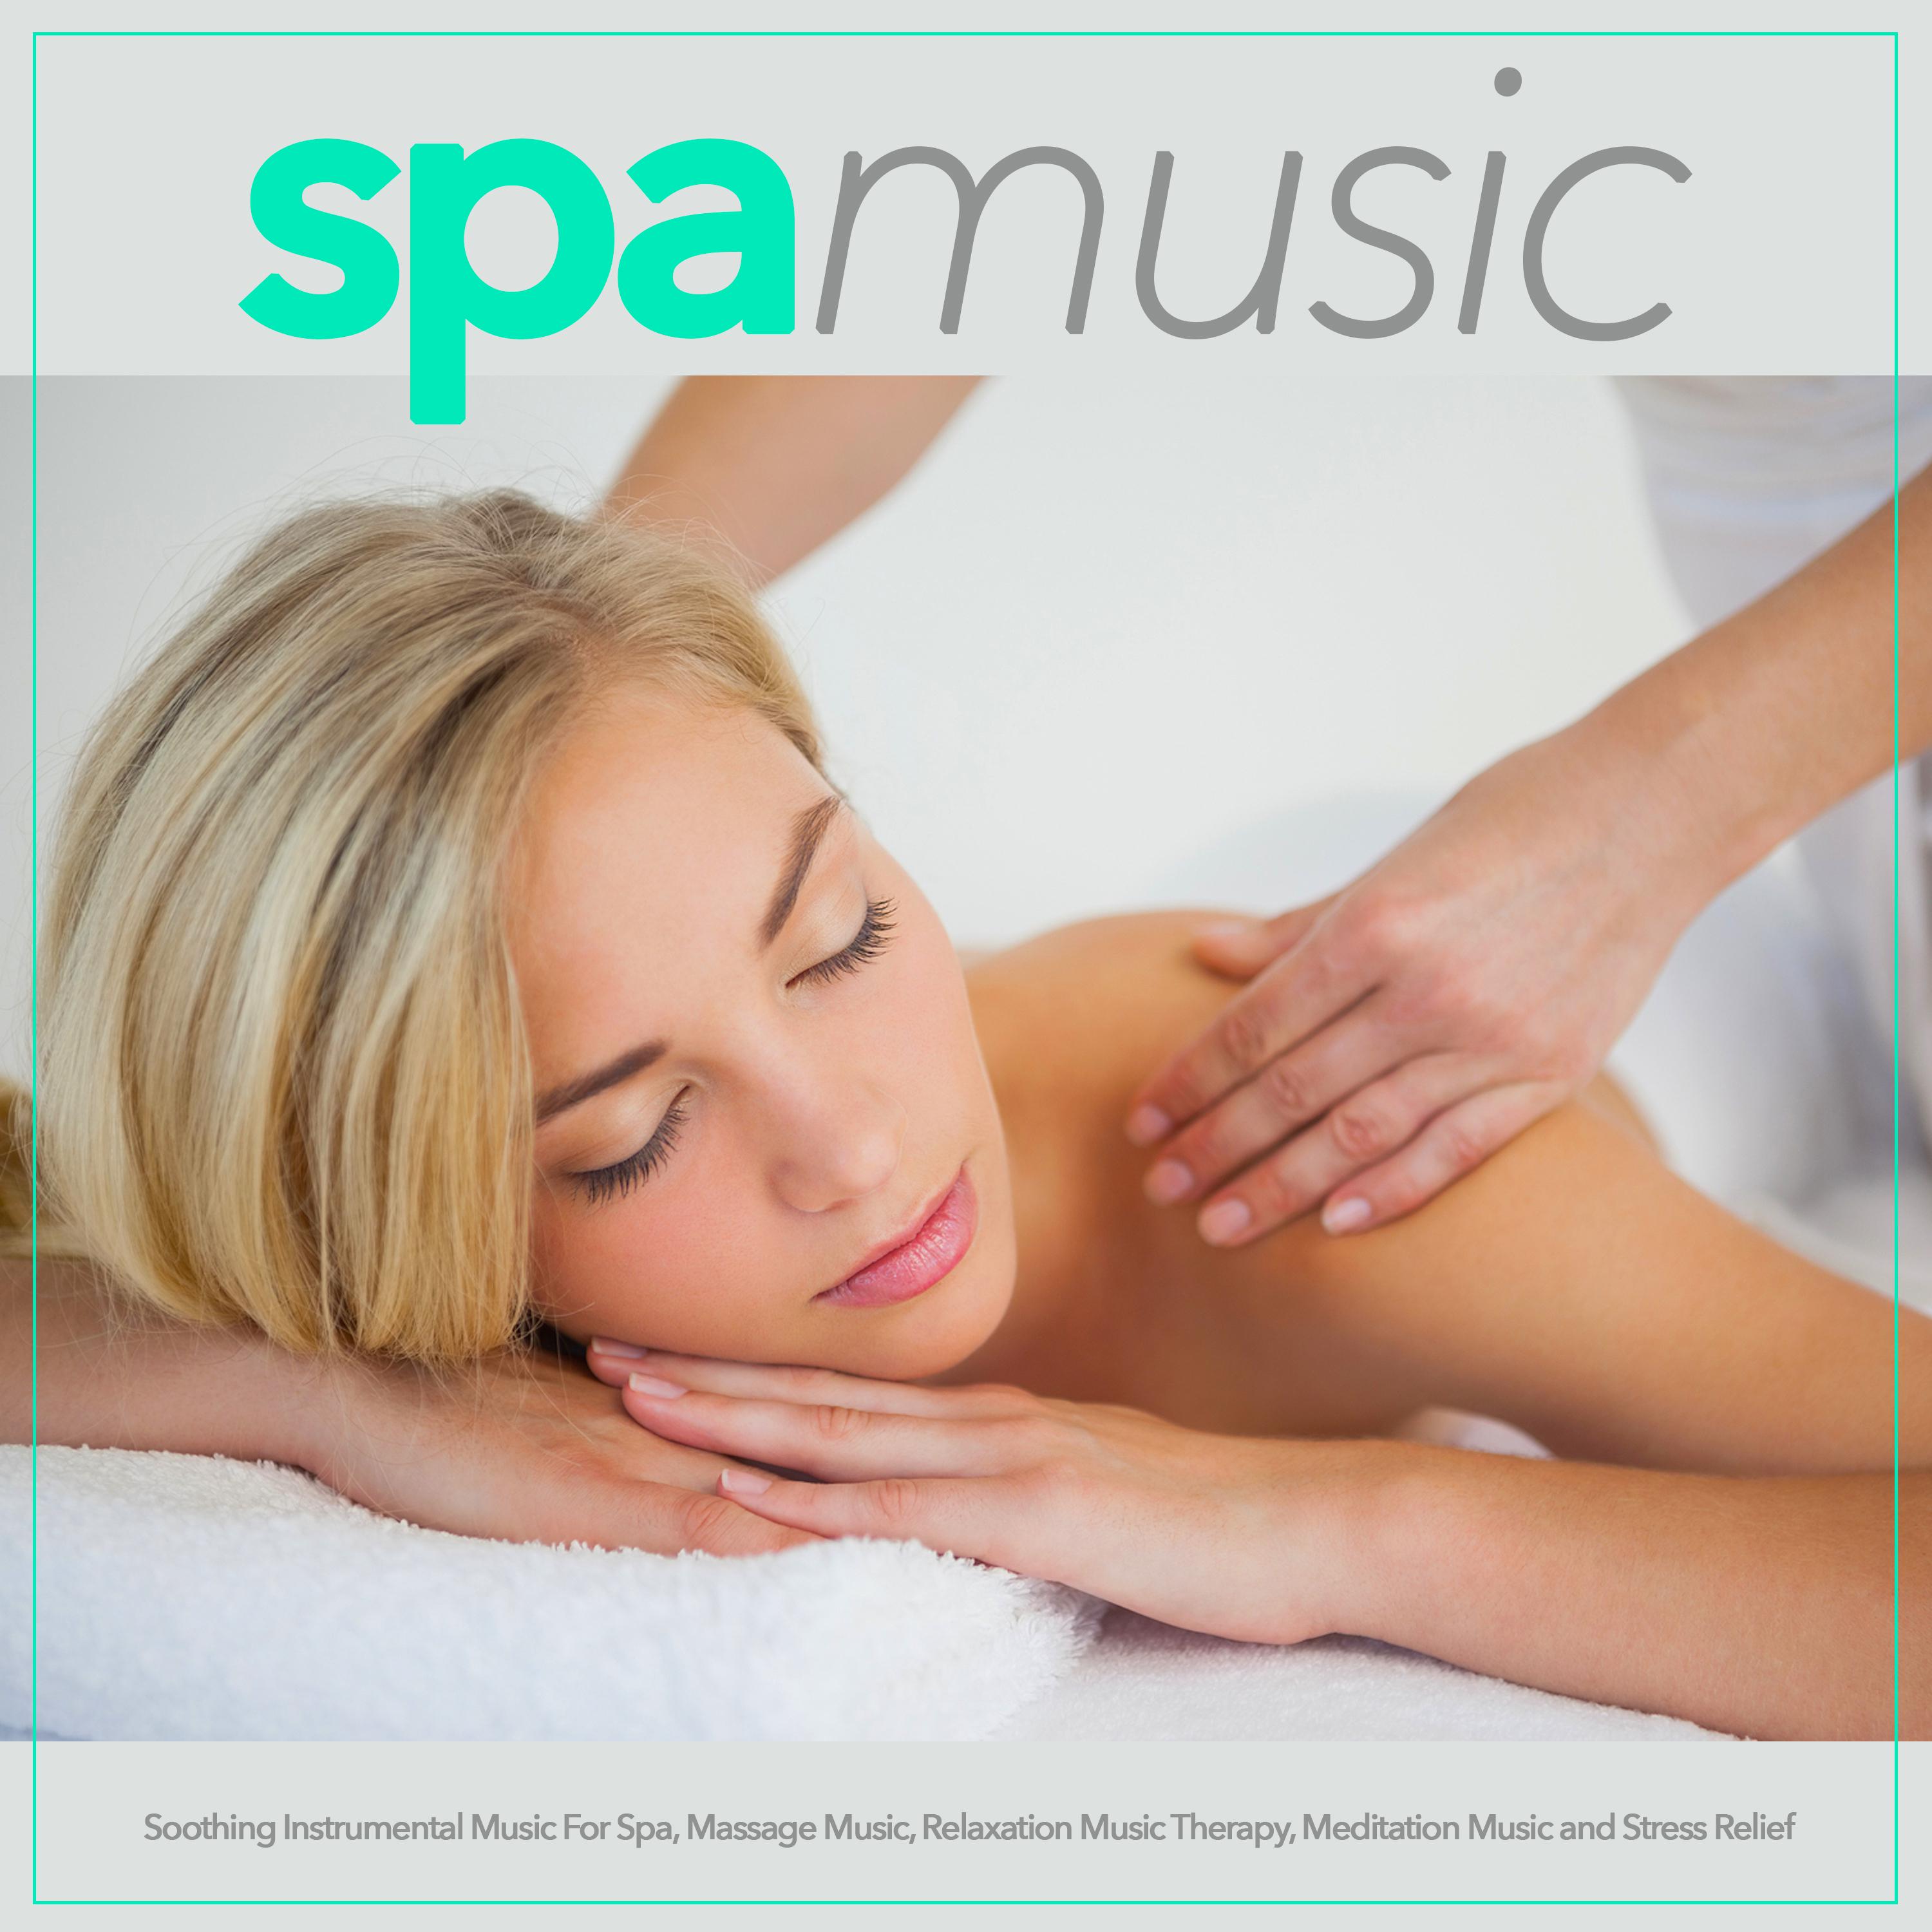 Music For Relaxation and Massage